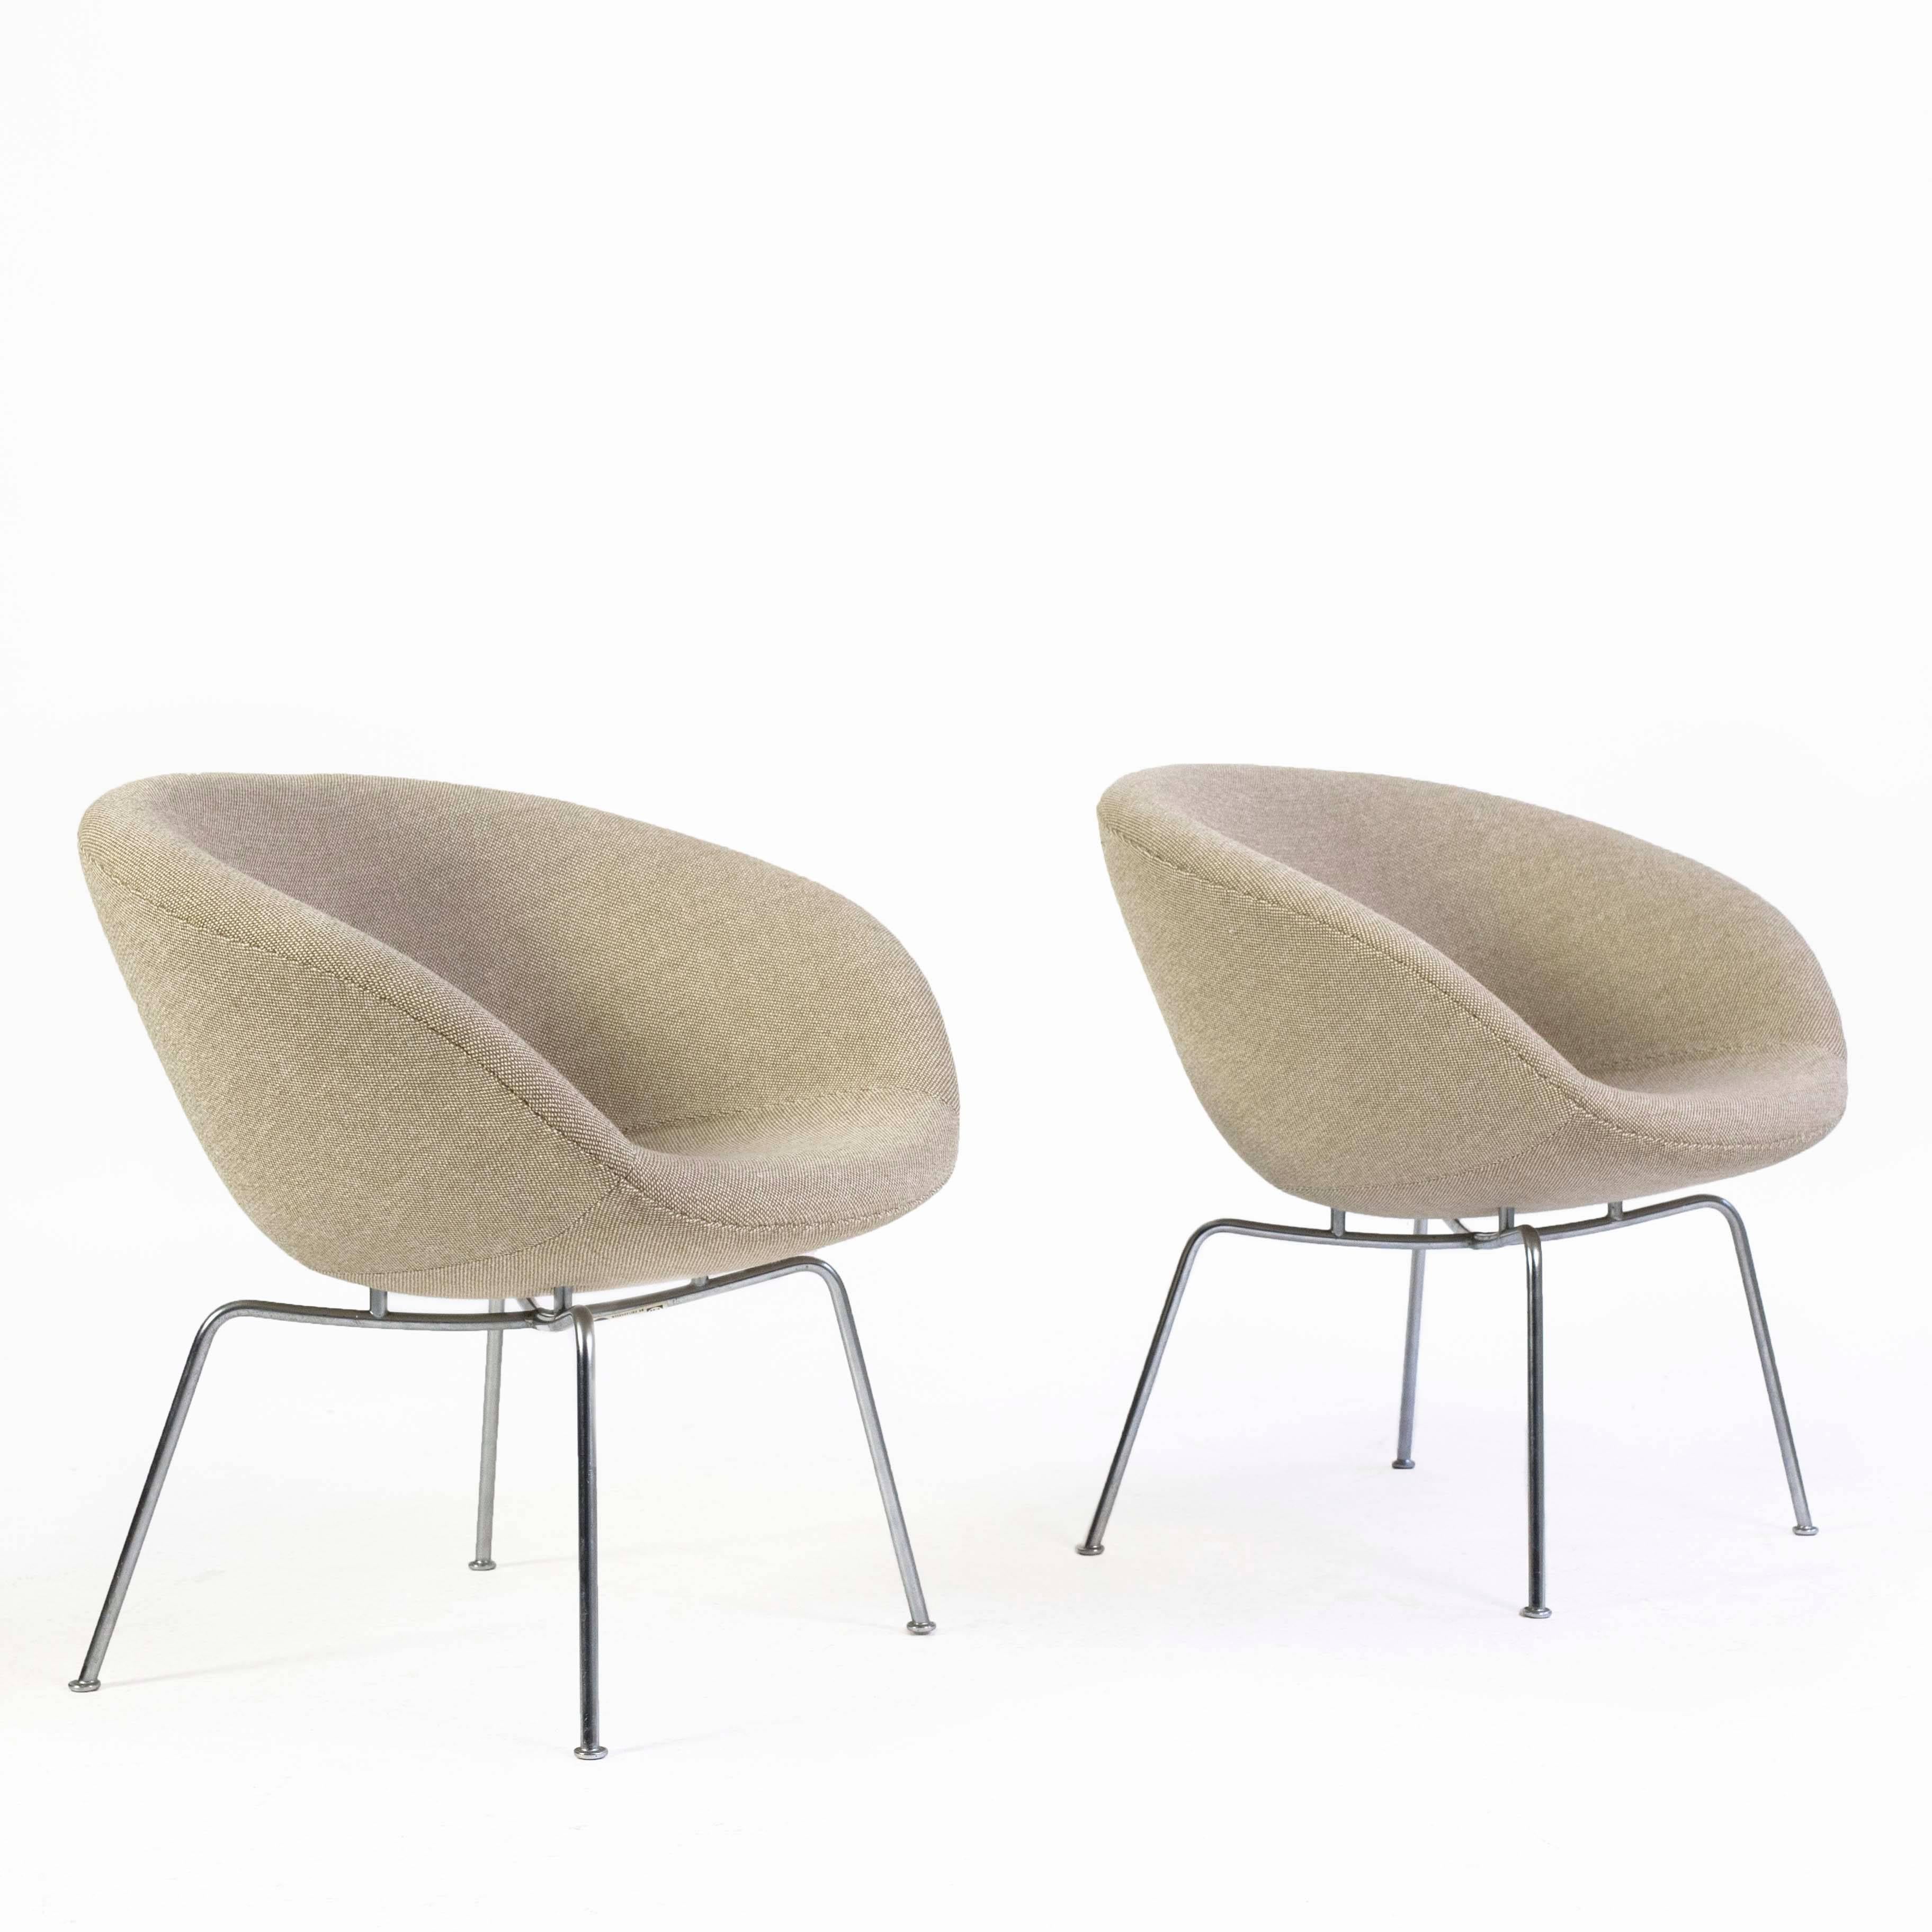 A pair of Arne Jacobsen pot chairs. 

Frames of chrome-plated steel, shells upholstered with beige fabric. 

Designed By Arne Jacobsen for the SAS Hotel Copenhagen 1958-1959, manufactured by Fritz Hansen. 

Fine restored condition.